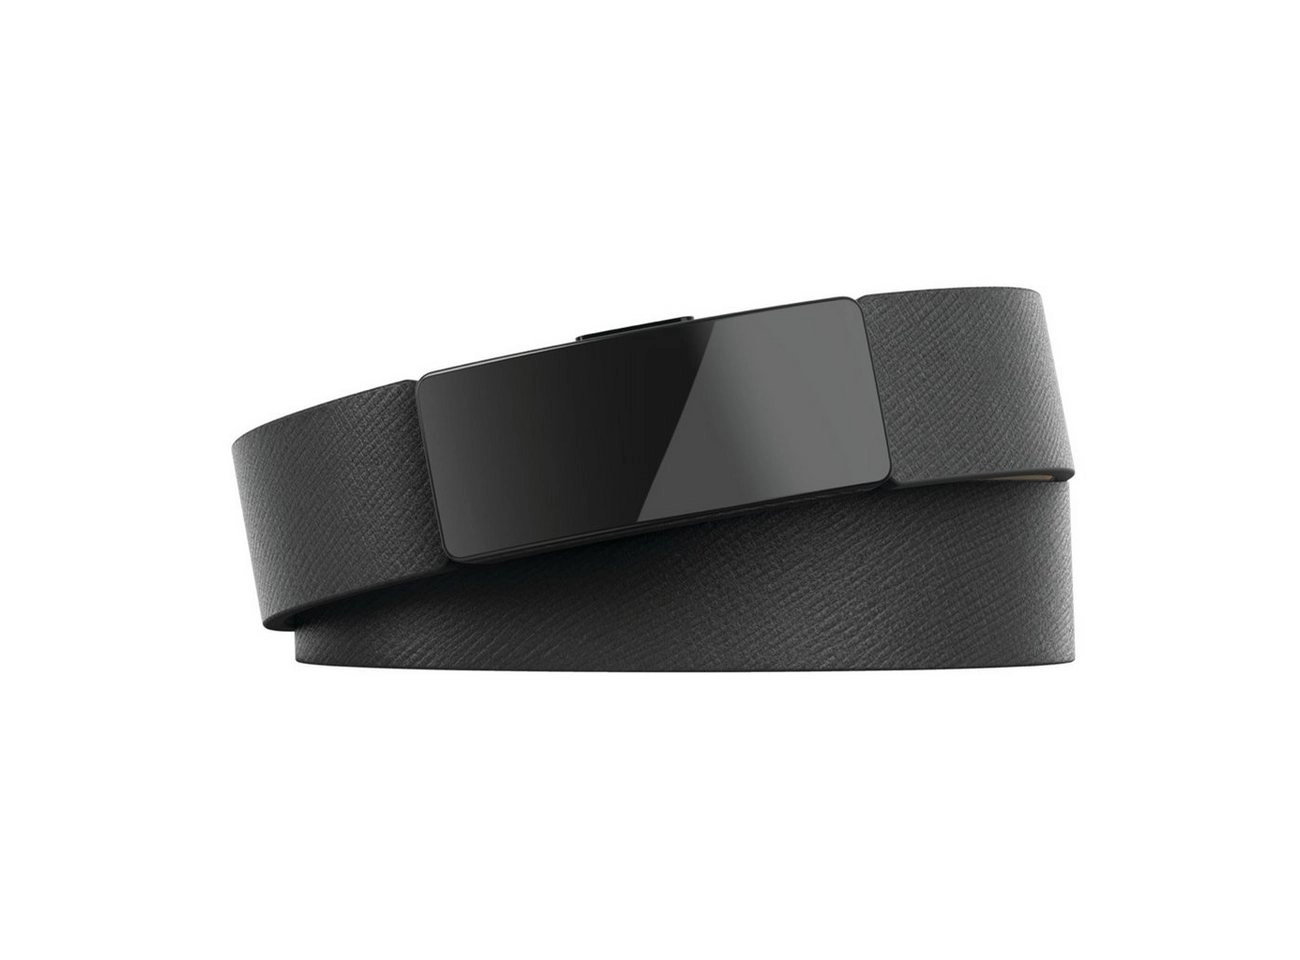 Fitbit Luxe, Leather Double Wrap, Armband schwarz , One Size